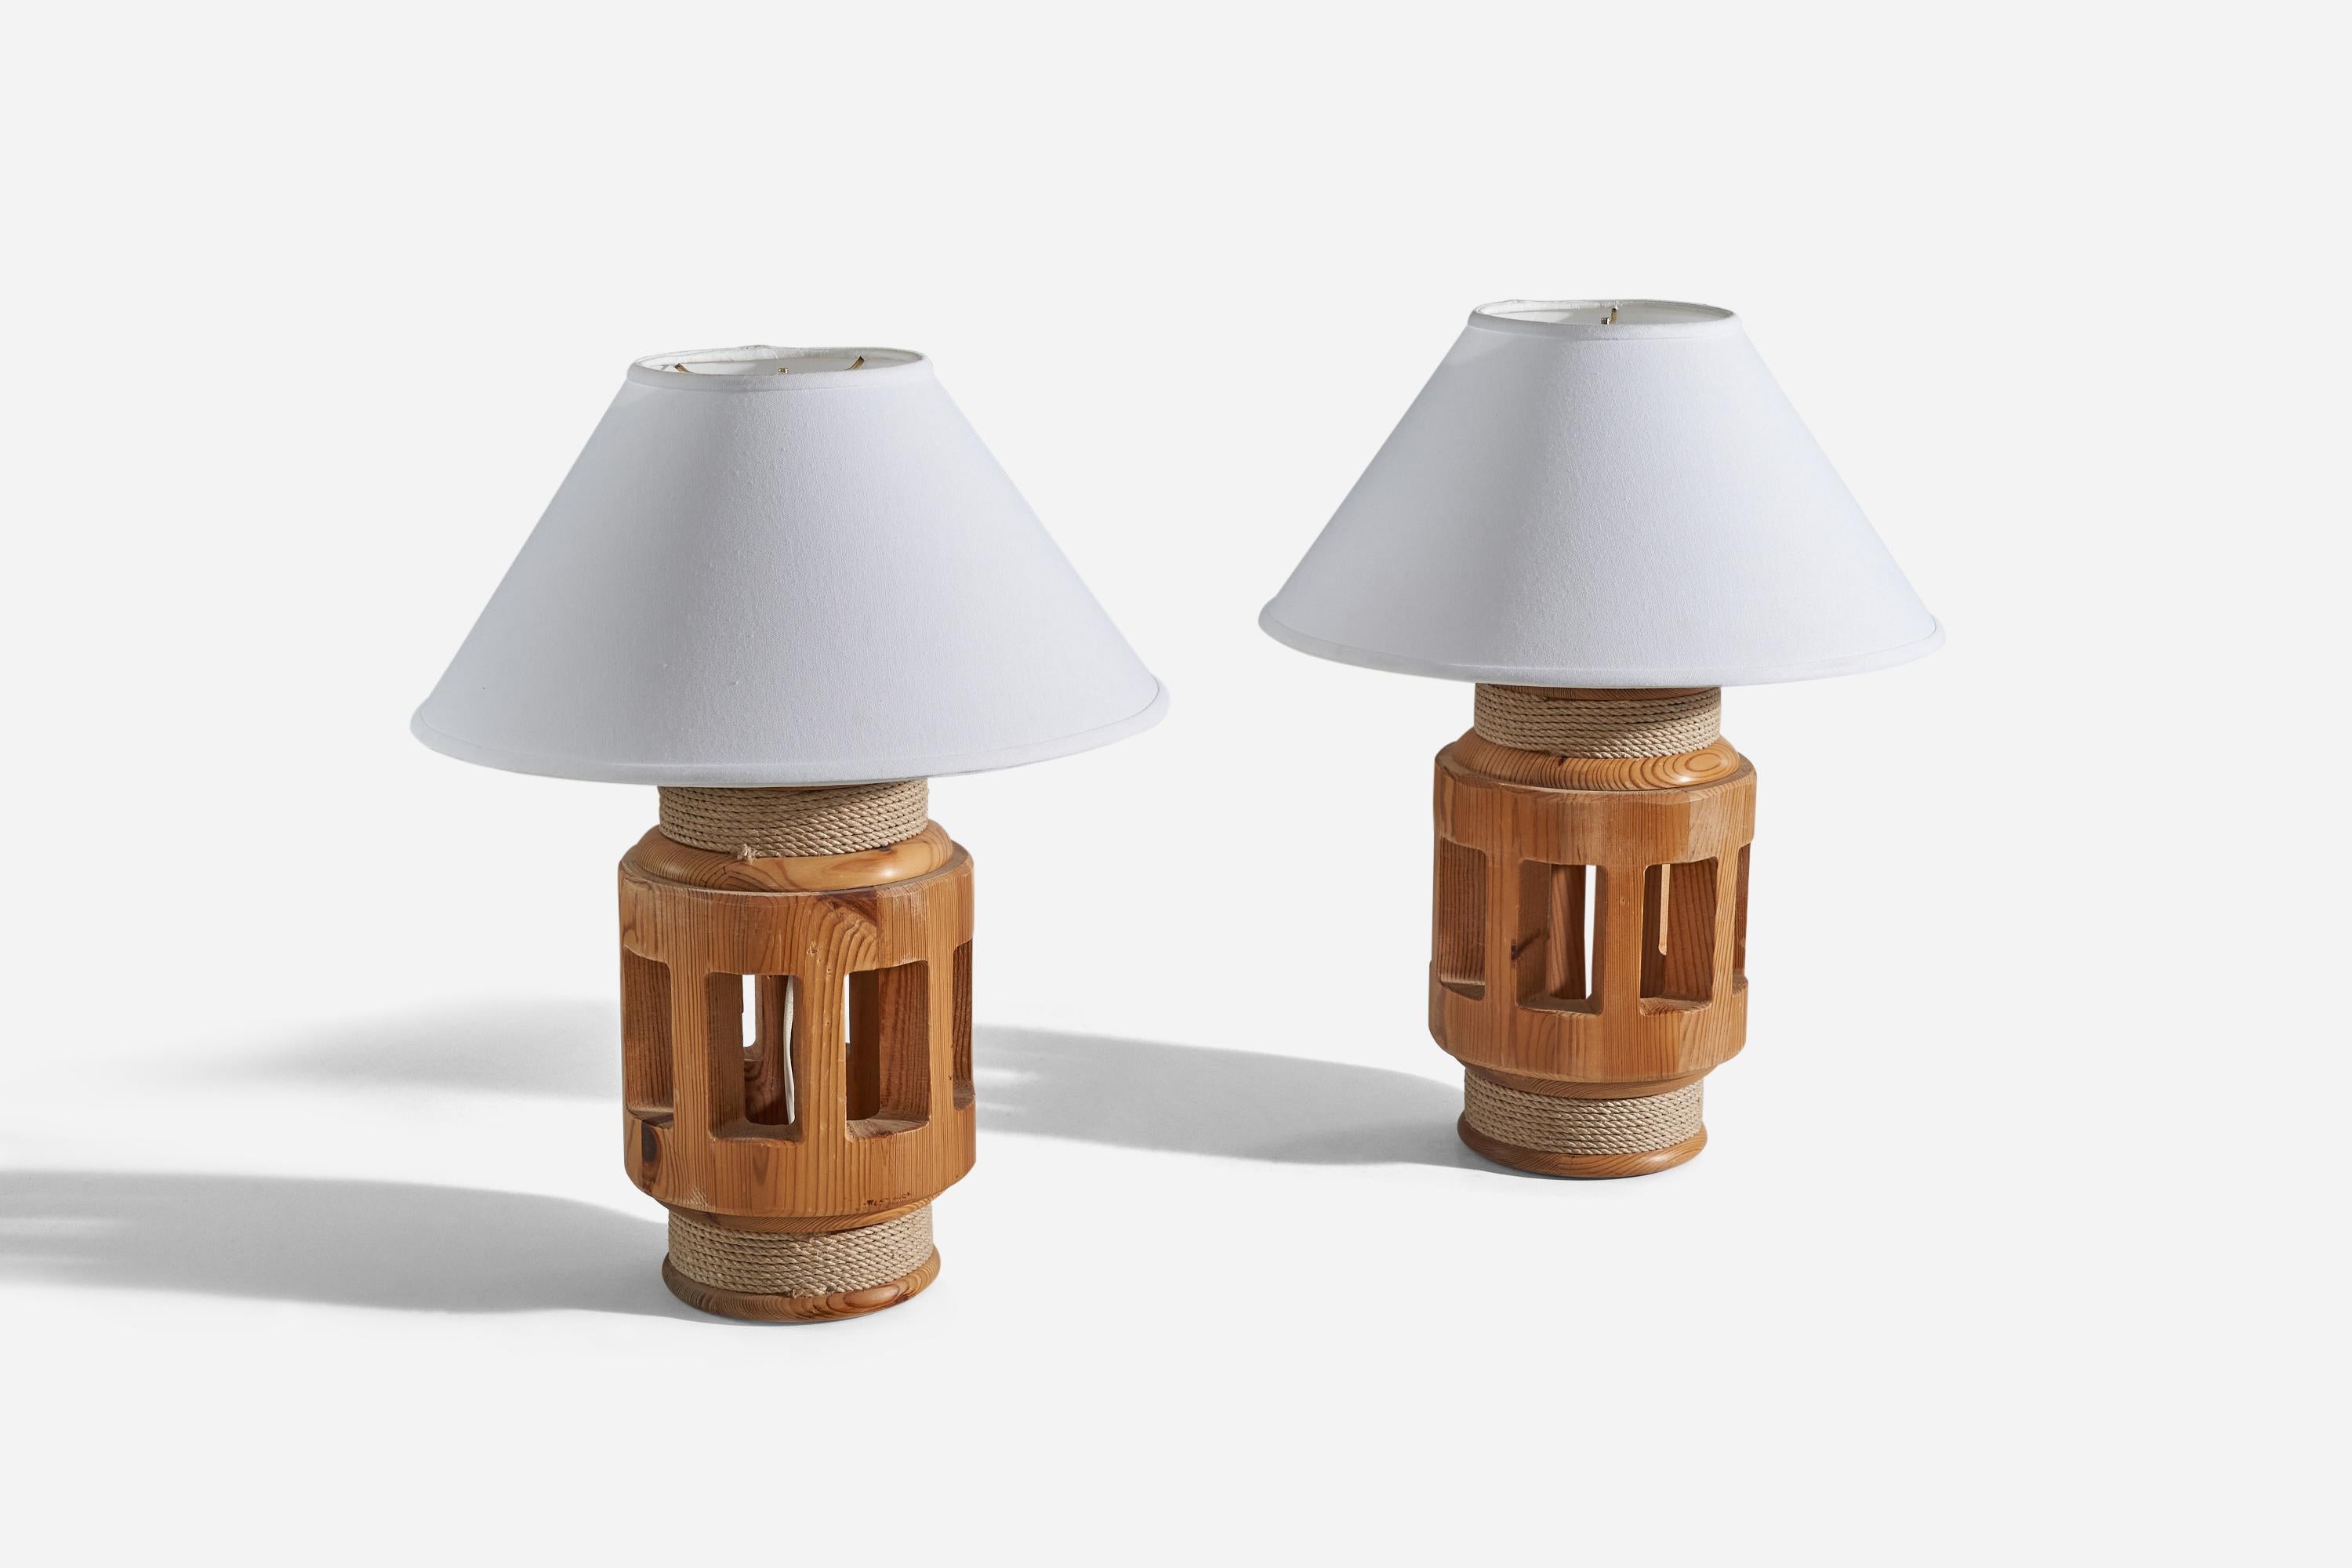 A pair of pine and cord table lamps designed and produced in Sweden, 1970s. 

Sold without lampshade. 
Dimensions of Lamp (inches) : 15.37 x 7.62 x 7.62 (H x W x D)
Dimensions of Shade (inches) : 6.25 x 16.37 x 9.12 (T x B x S)
Dimension of